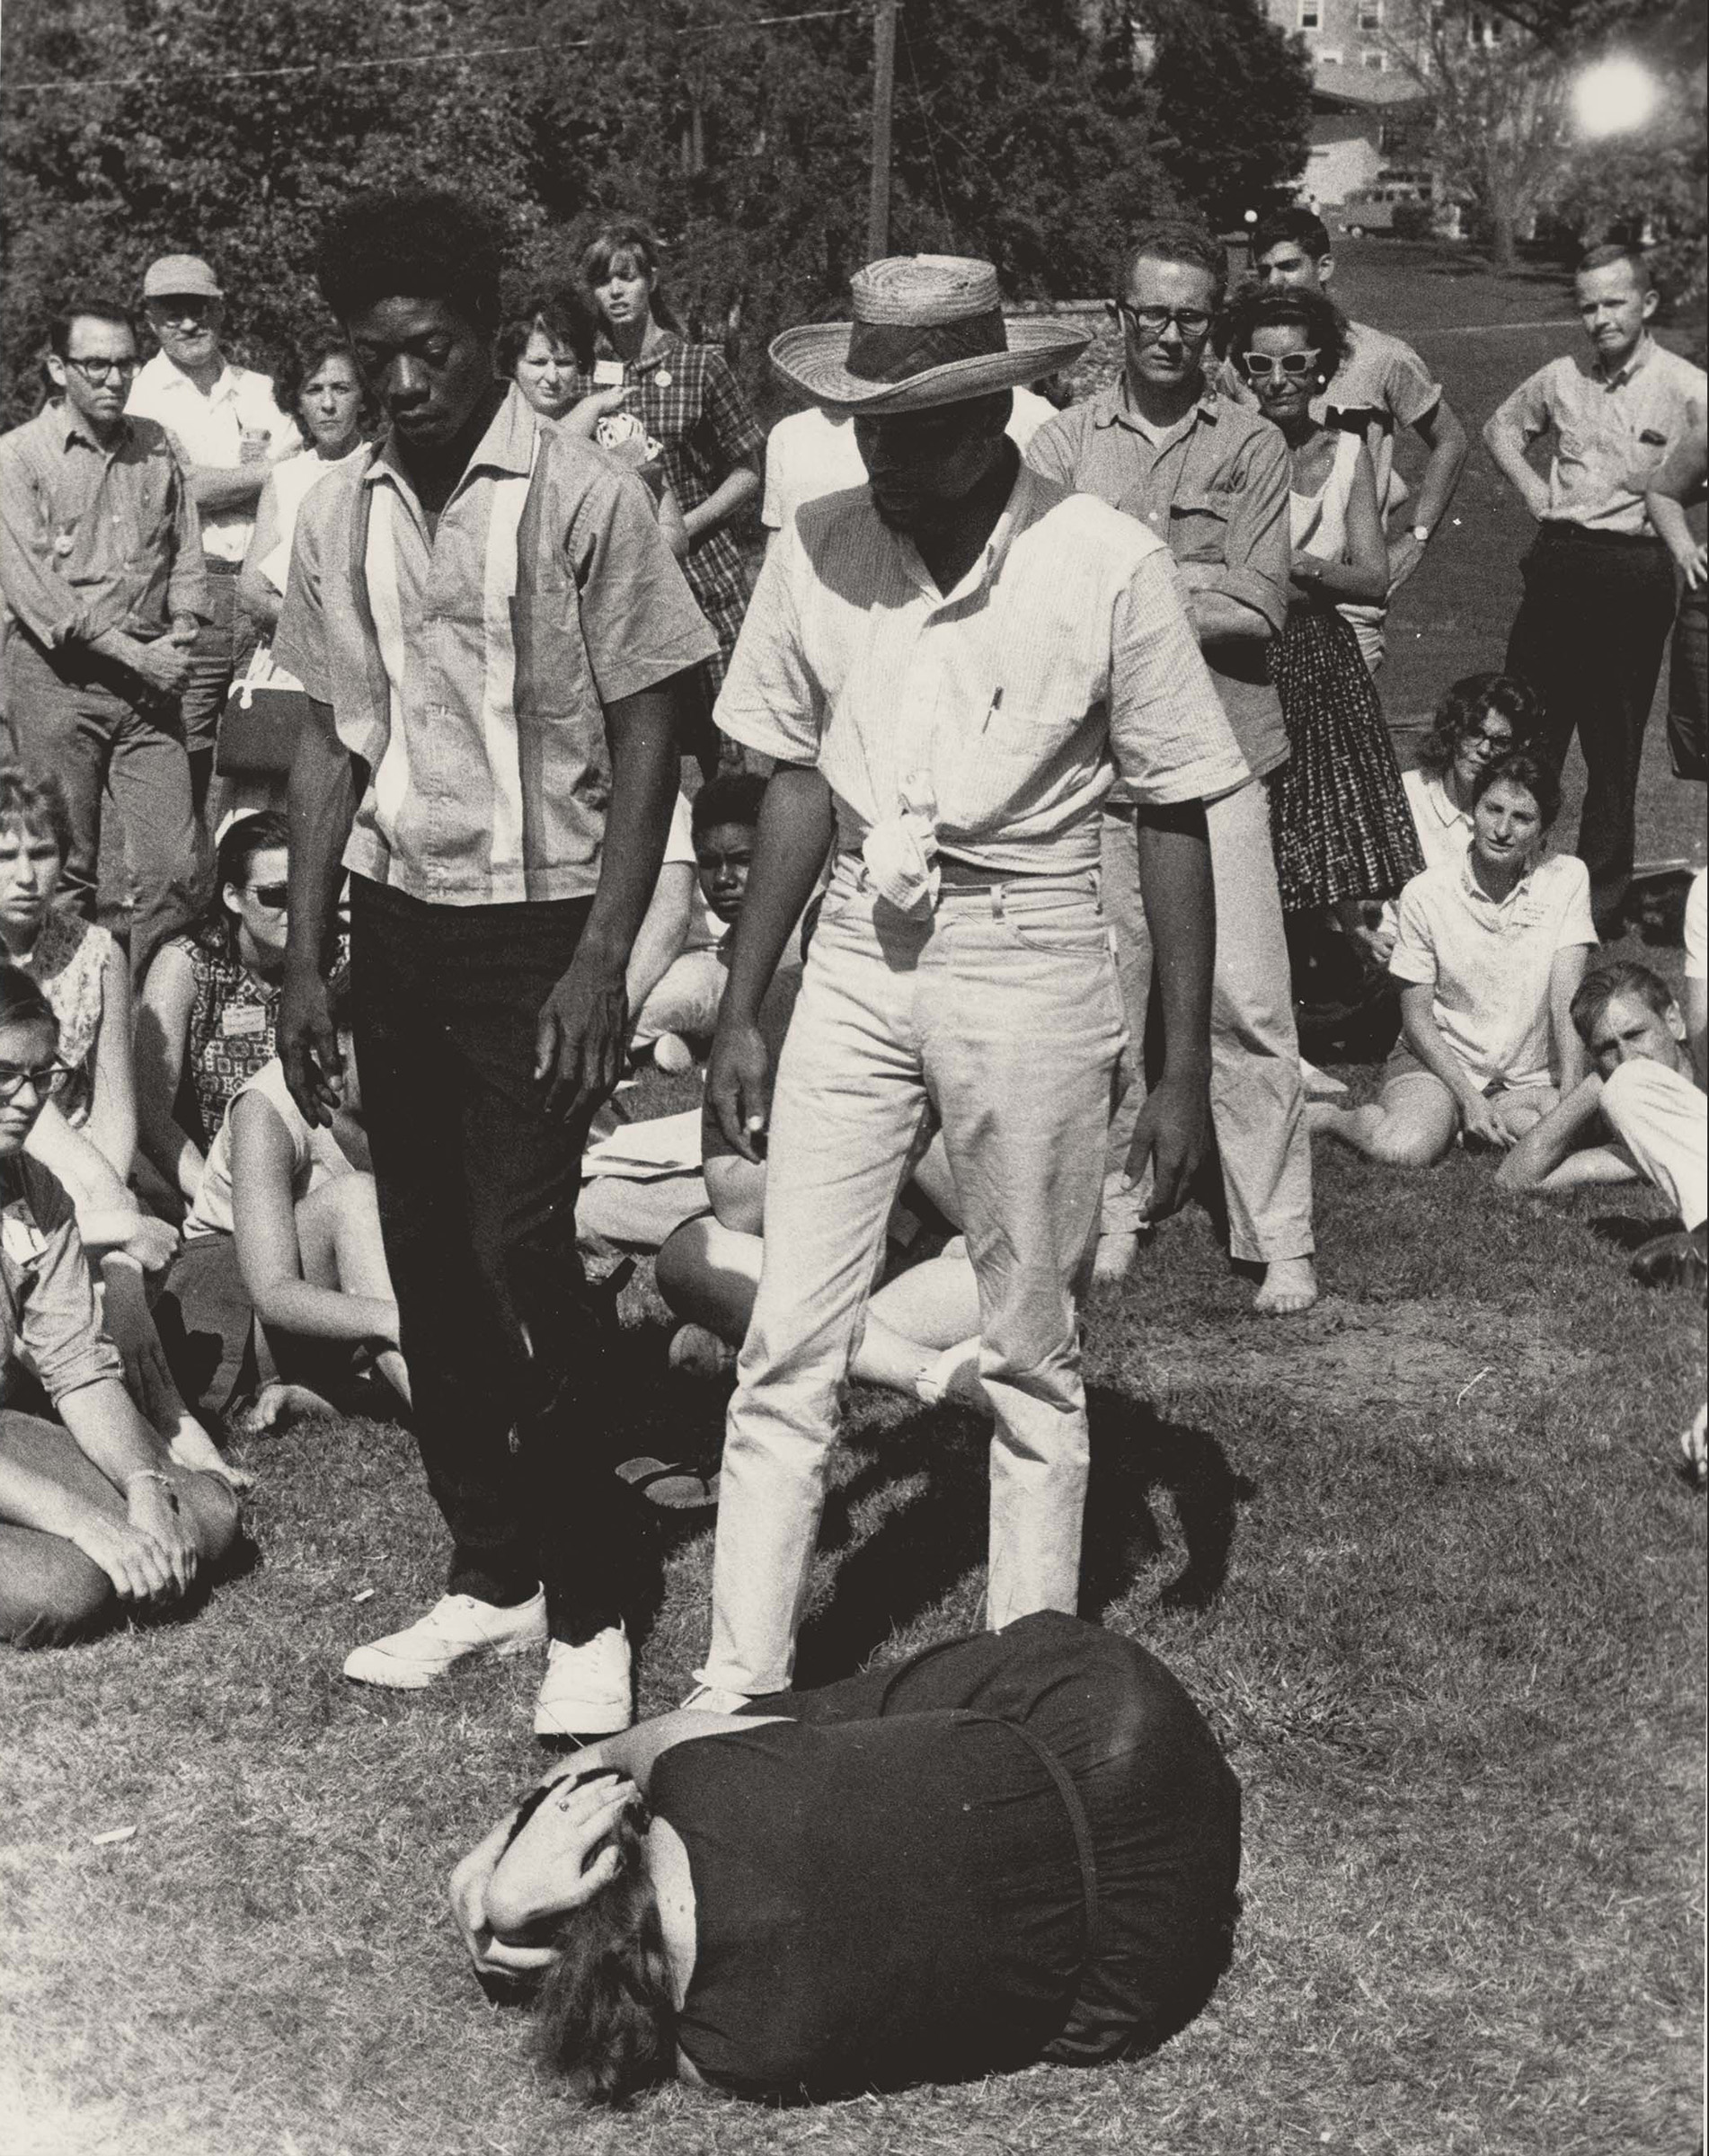 Demonstration of Nonviolent Self-defense, June 1964. Photograph by Herbert Randall. SNCC Field Secretaries Bruce Gordon (left), Cordell Hull Reagon (right), and a female volunteer, demonstrate how Freedom Summer volunteers should protect themselves from physical assault. This training was part of the Freedom Summer orientation held on the campus of Western College for Women in Oxford, Ohio, between June 22-27, 1964. M351 Herbert Randall Freedom Summer Photographs, Historical Manuscripts, The University of Southern Mississippi.